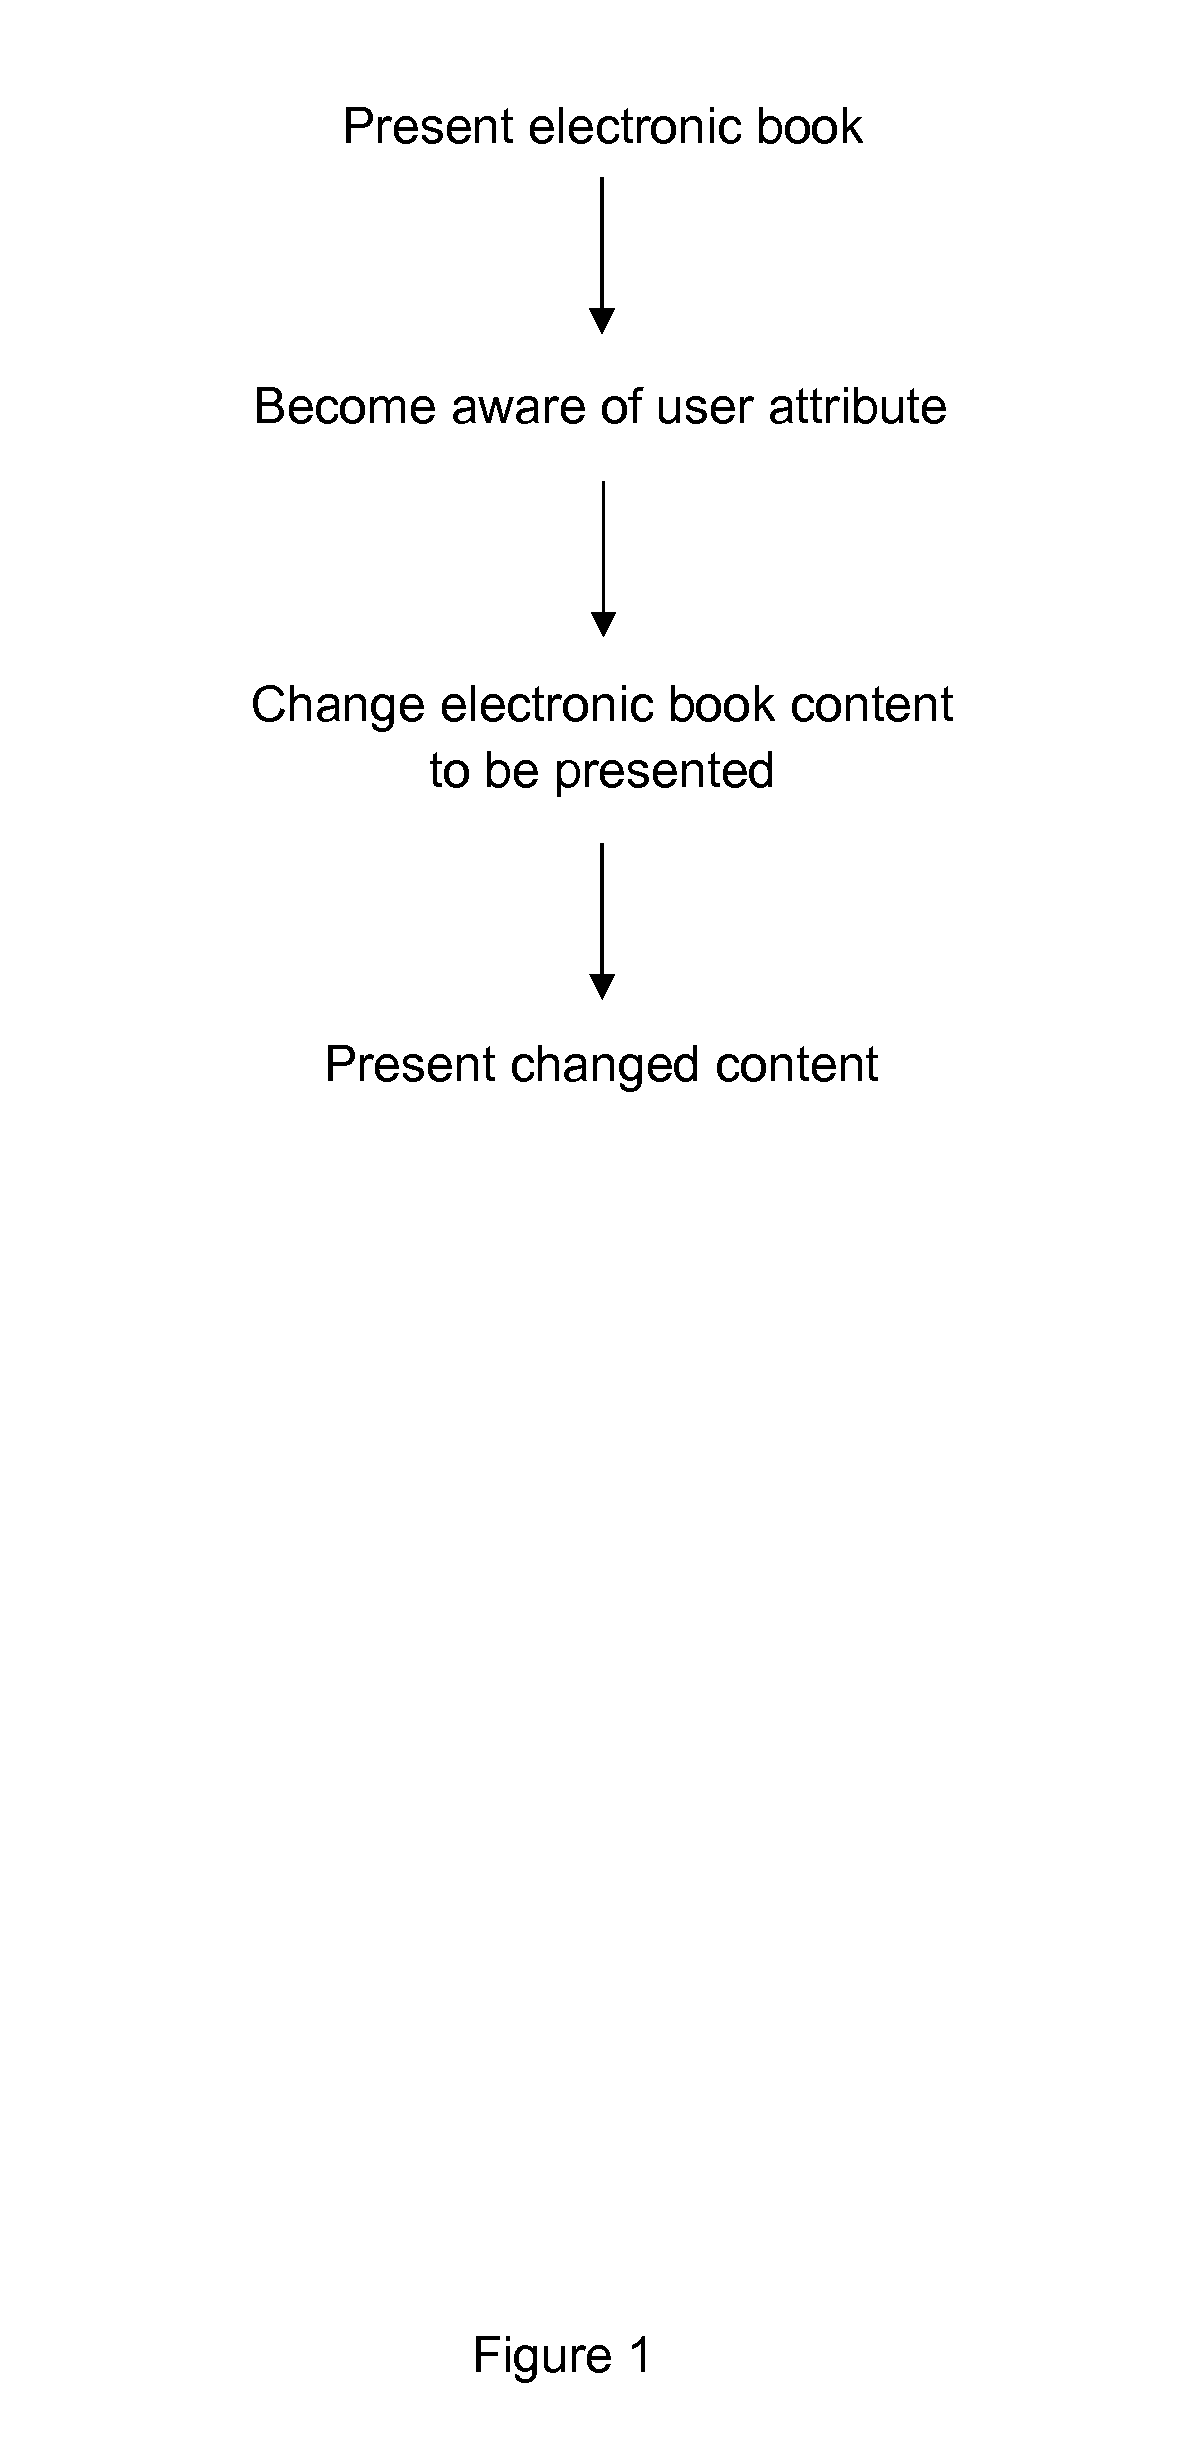 Method and system for a new-era electronic book